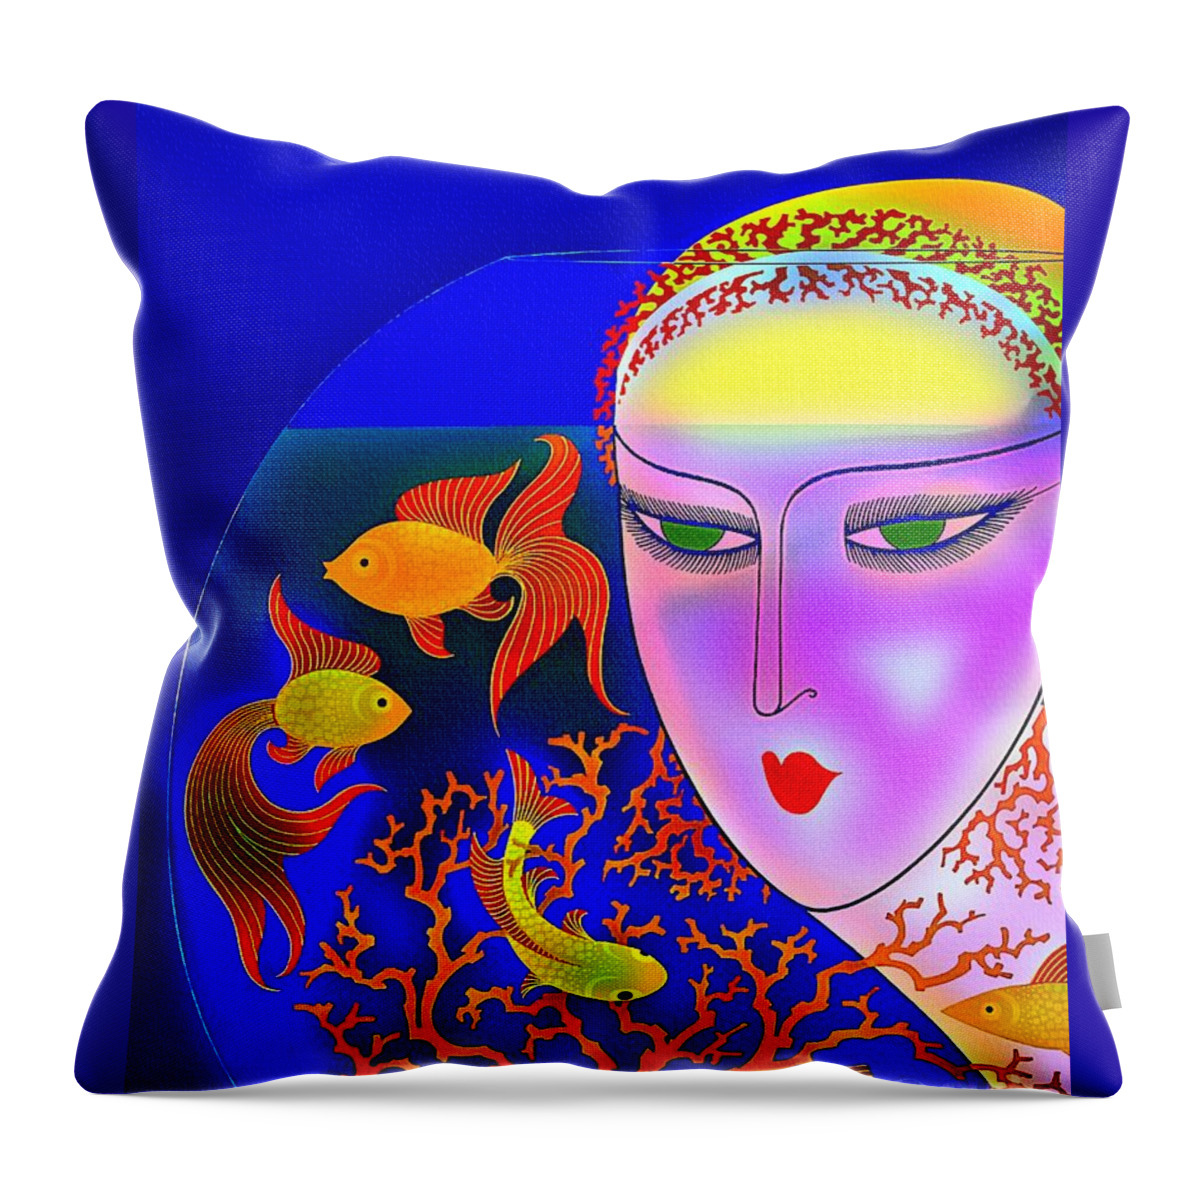 Art Deco Throw Pillow featuring the painting The Goldfish Bowl - Vintage 1920s by Ian Gledhill